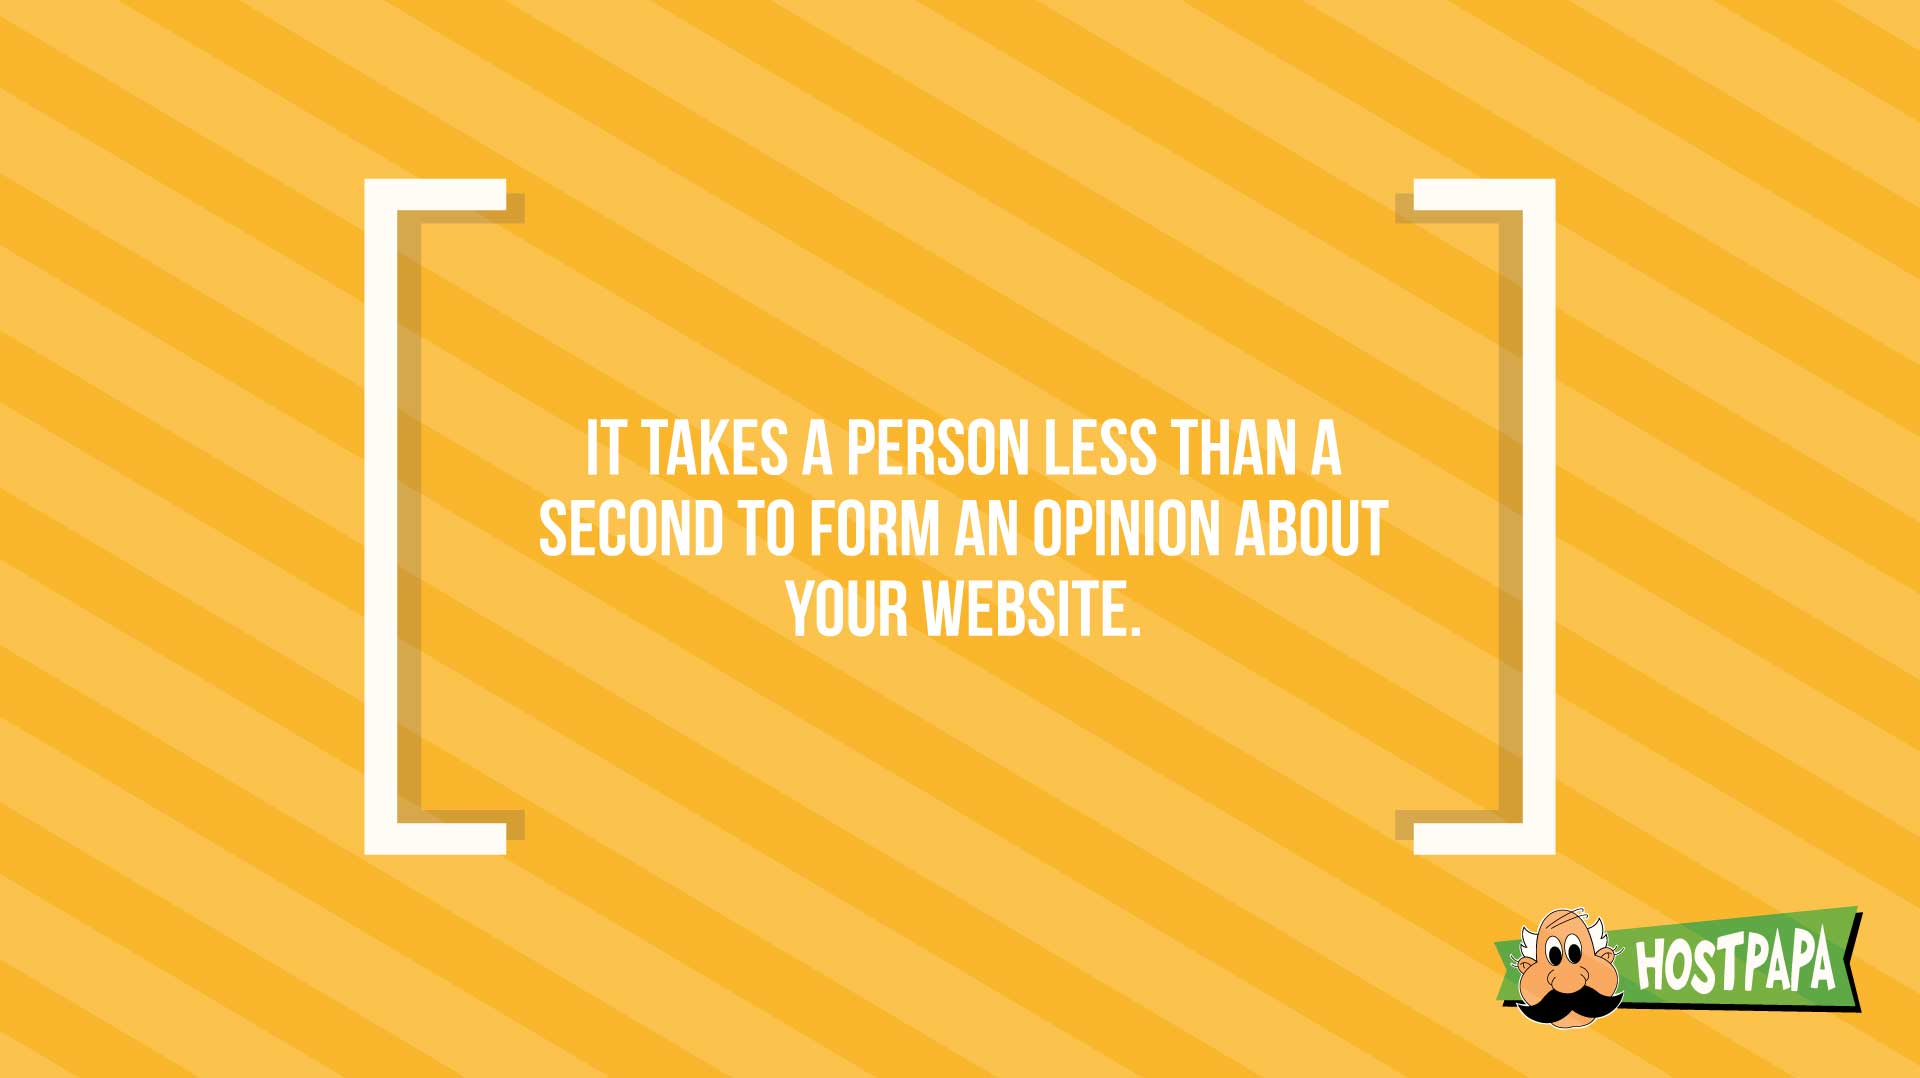 It takes a person less than a second to form an opinion about your website